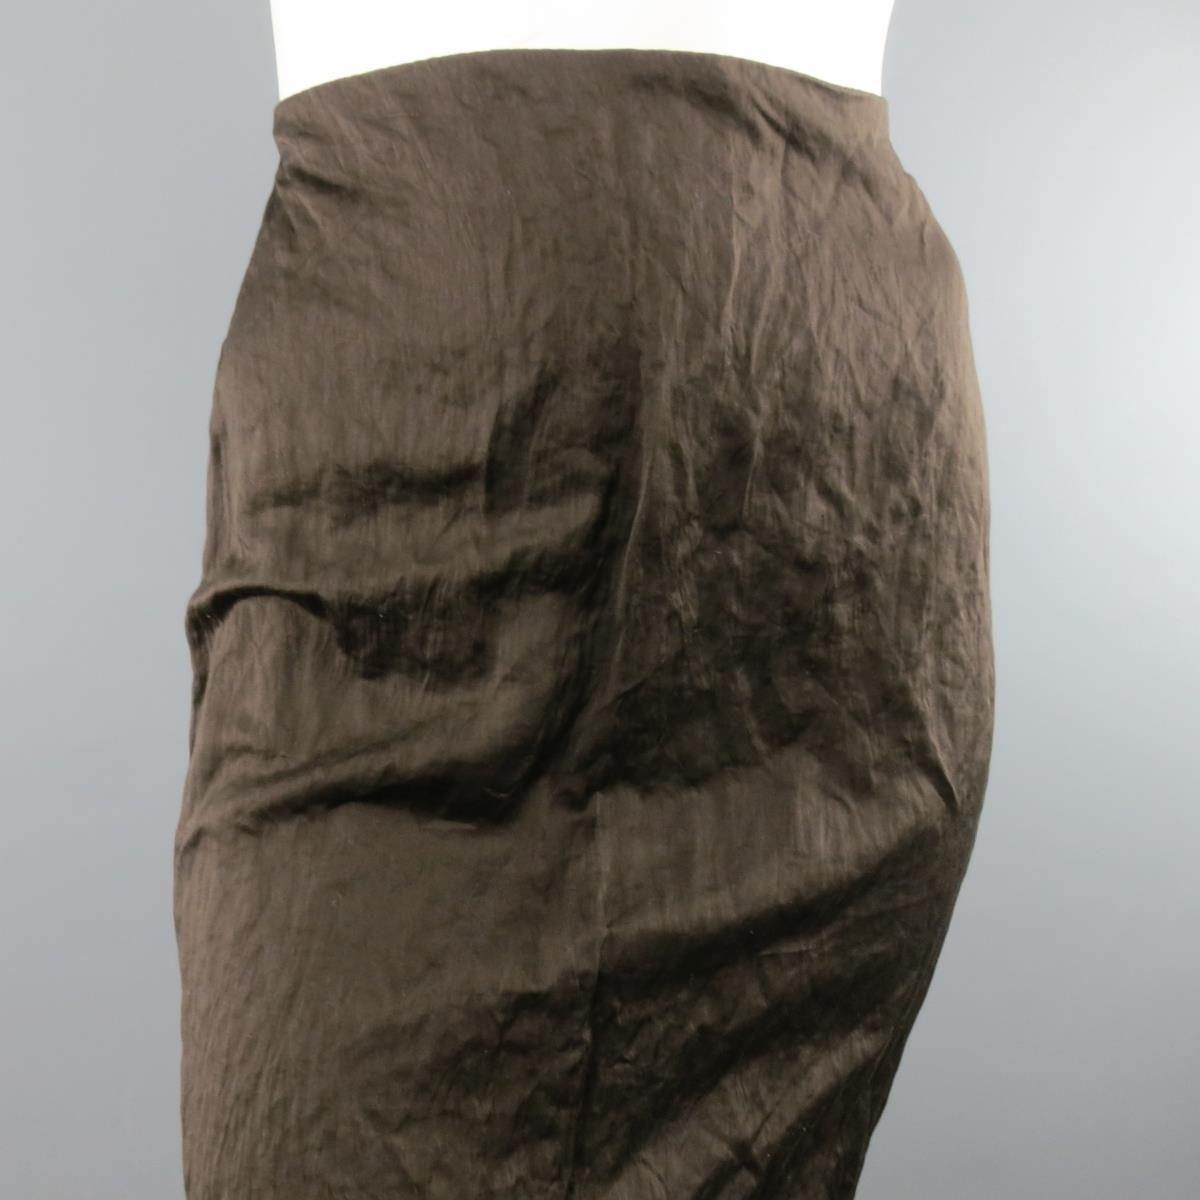 PRADA Spring/Summer 2009 Collection pencil skirt in a light weight, wrinkle textured brown cotton metal blend fabric. Matching jacket available separately. Made in Italy.

Excellent Pre-Owned Condition.
Marked: IT 44

Measurements:

Waist: 30